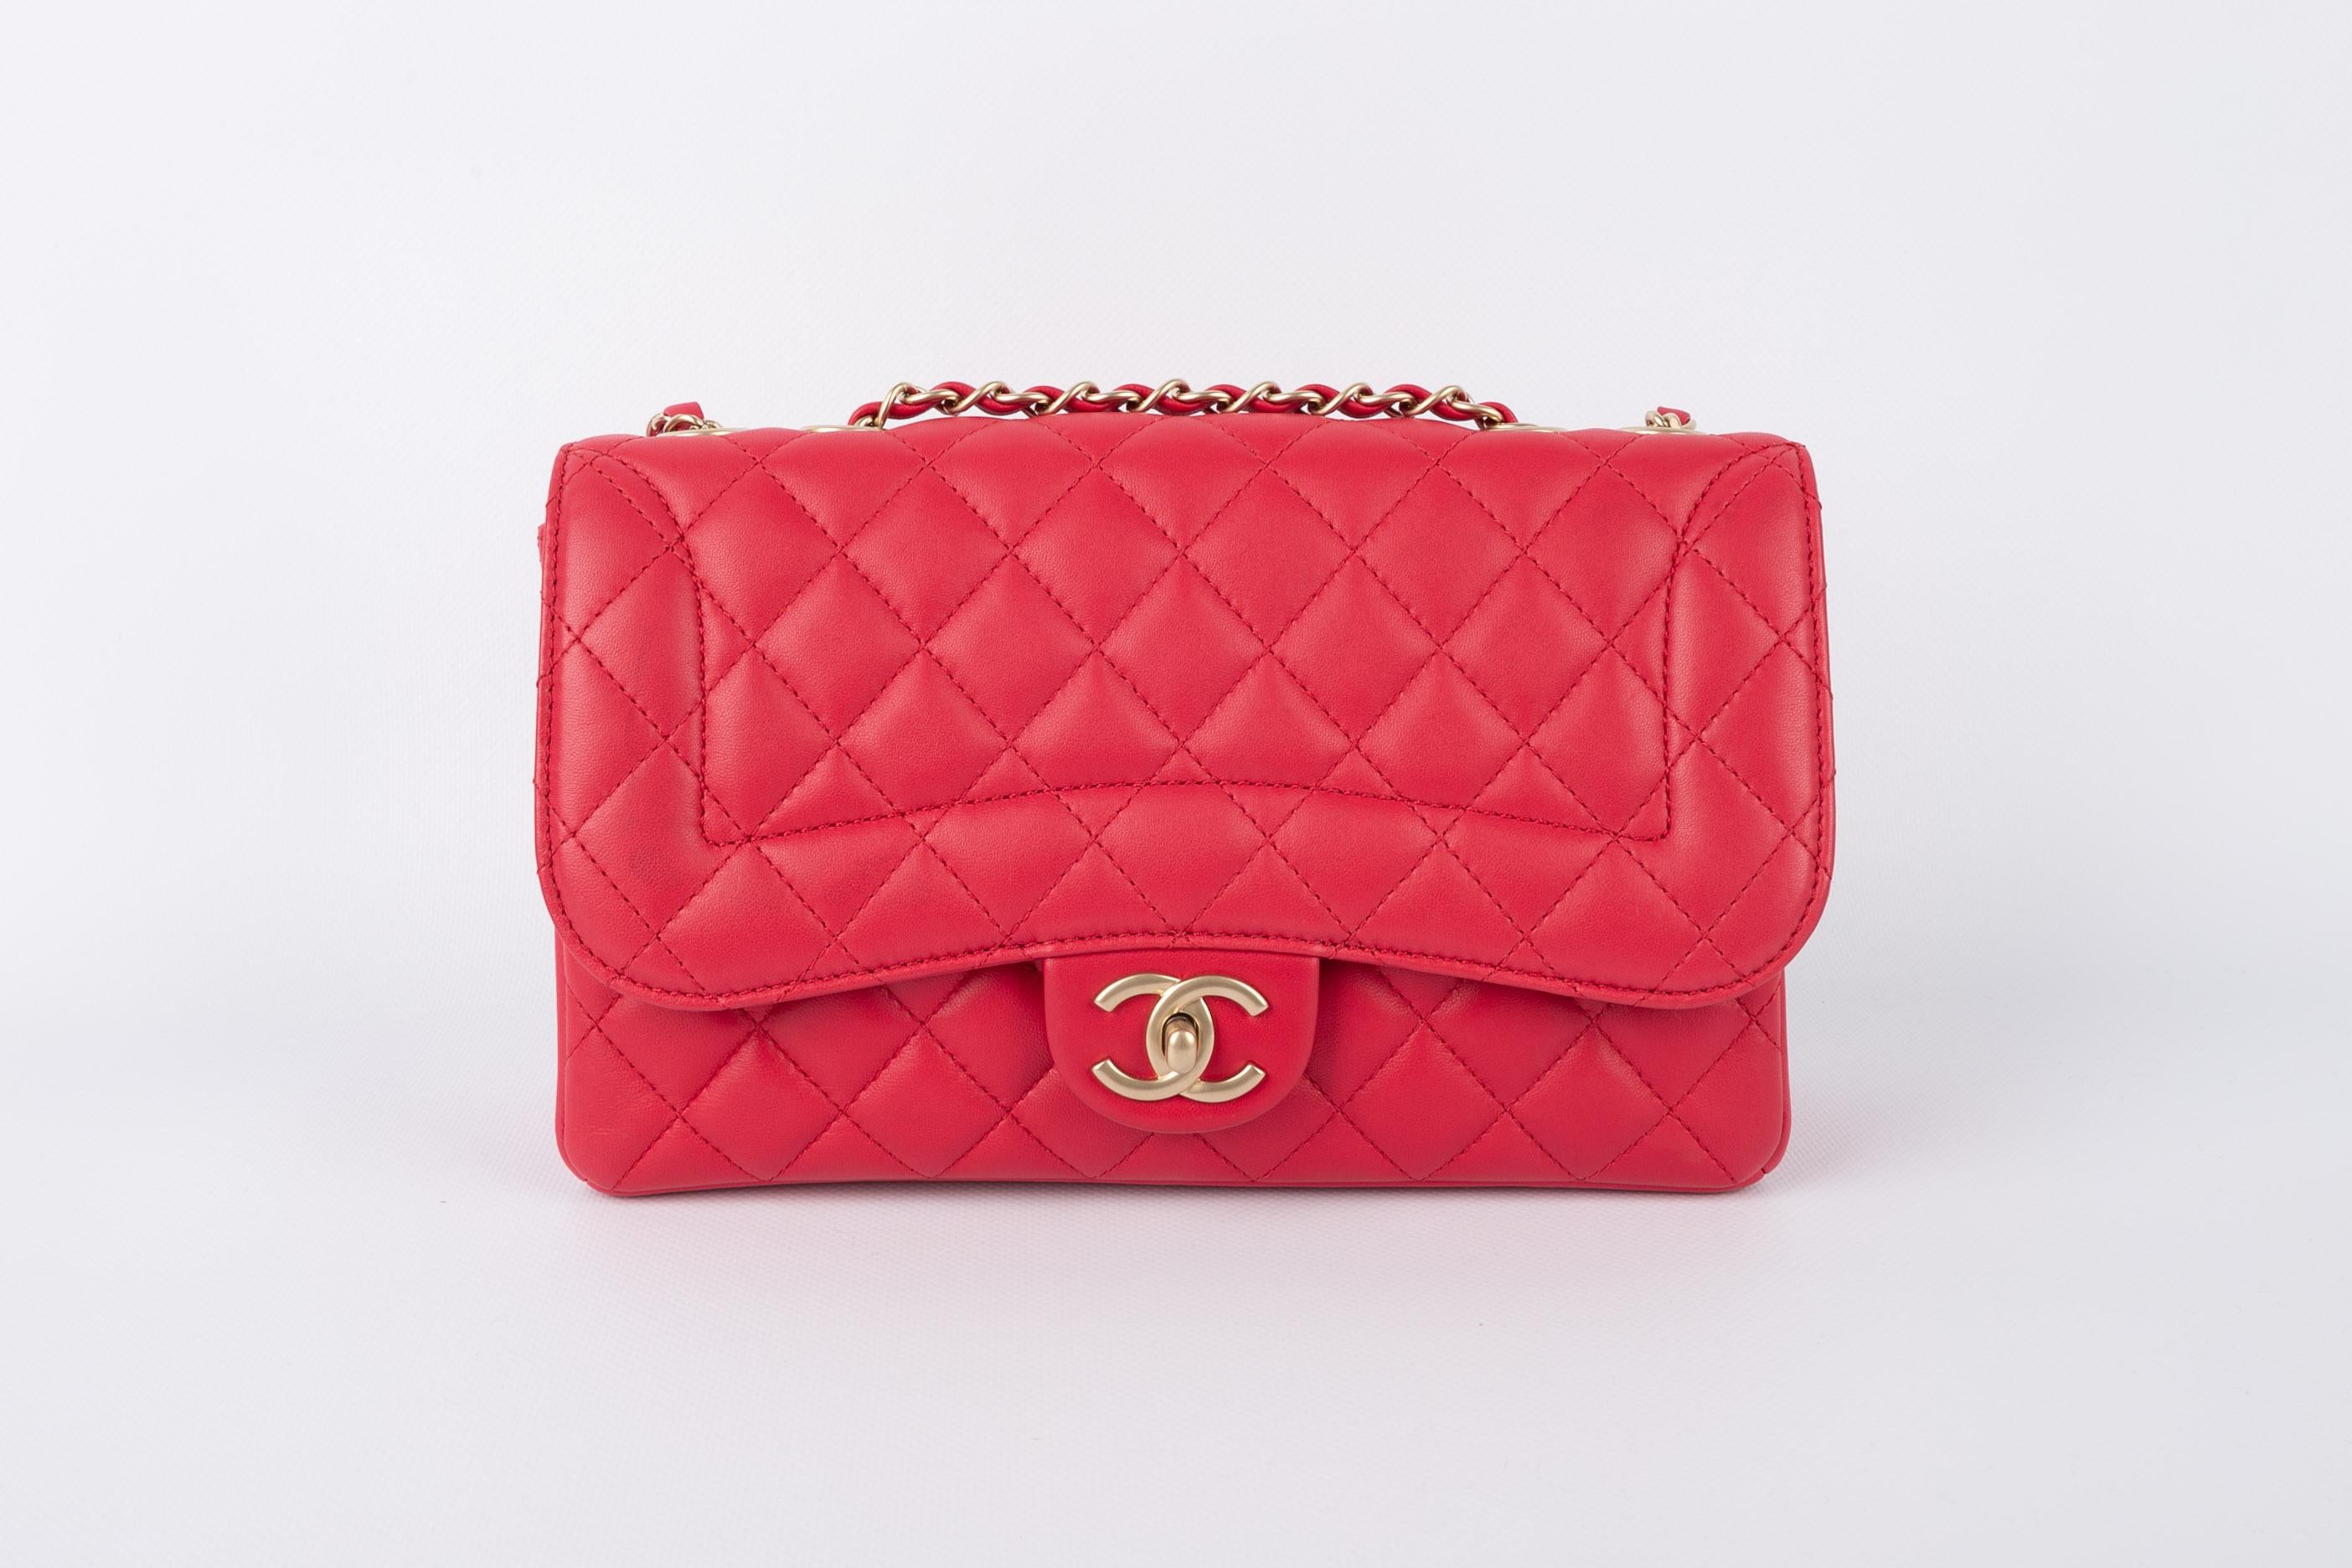 CHANEL - (Made in Italy) Quilted cherry-colored leather Timeless bag with golden metal elements. Bag with a serial number. 2015/2016 Collection. The bag was bought during the 2020 private sales.

Condition:
Very good condition

Dimensions:
Length: